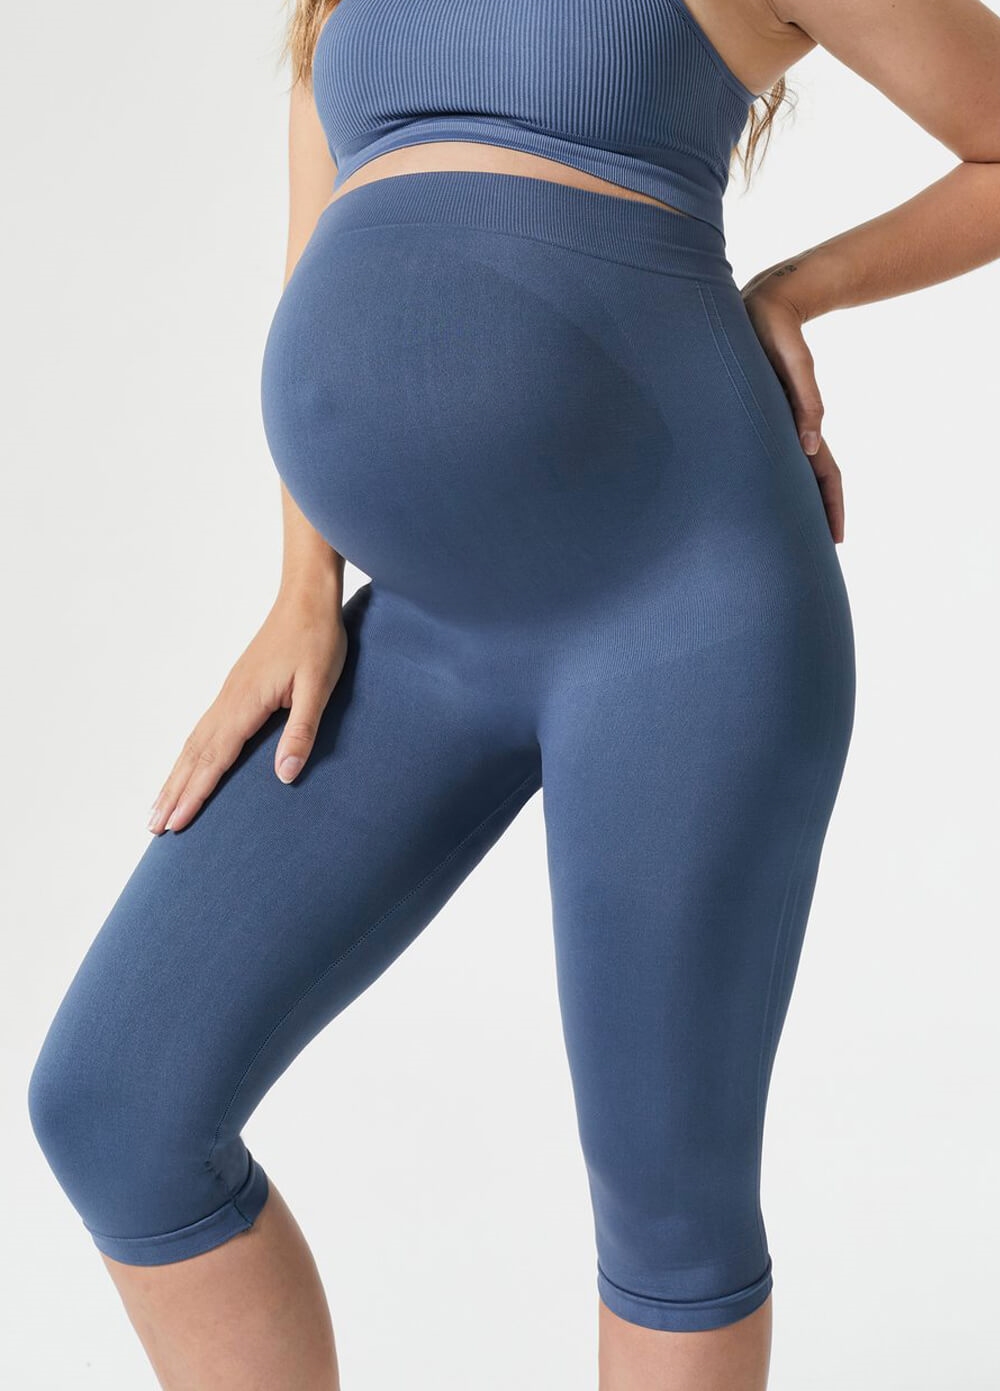 Blanqi - Maternity Belly Support Crop Leggings - Blue